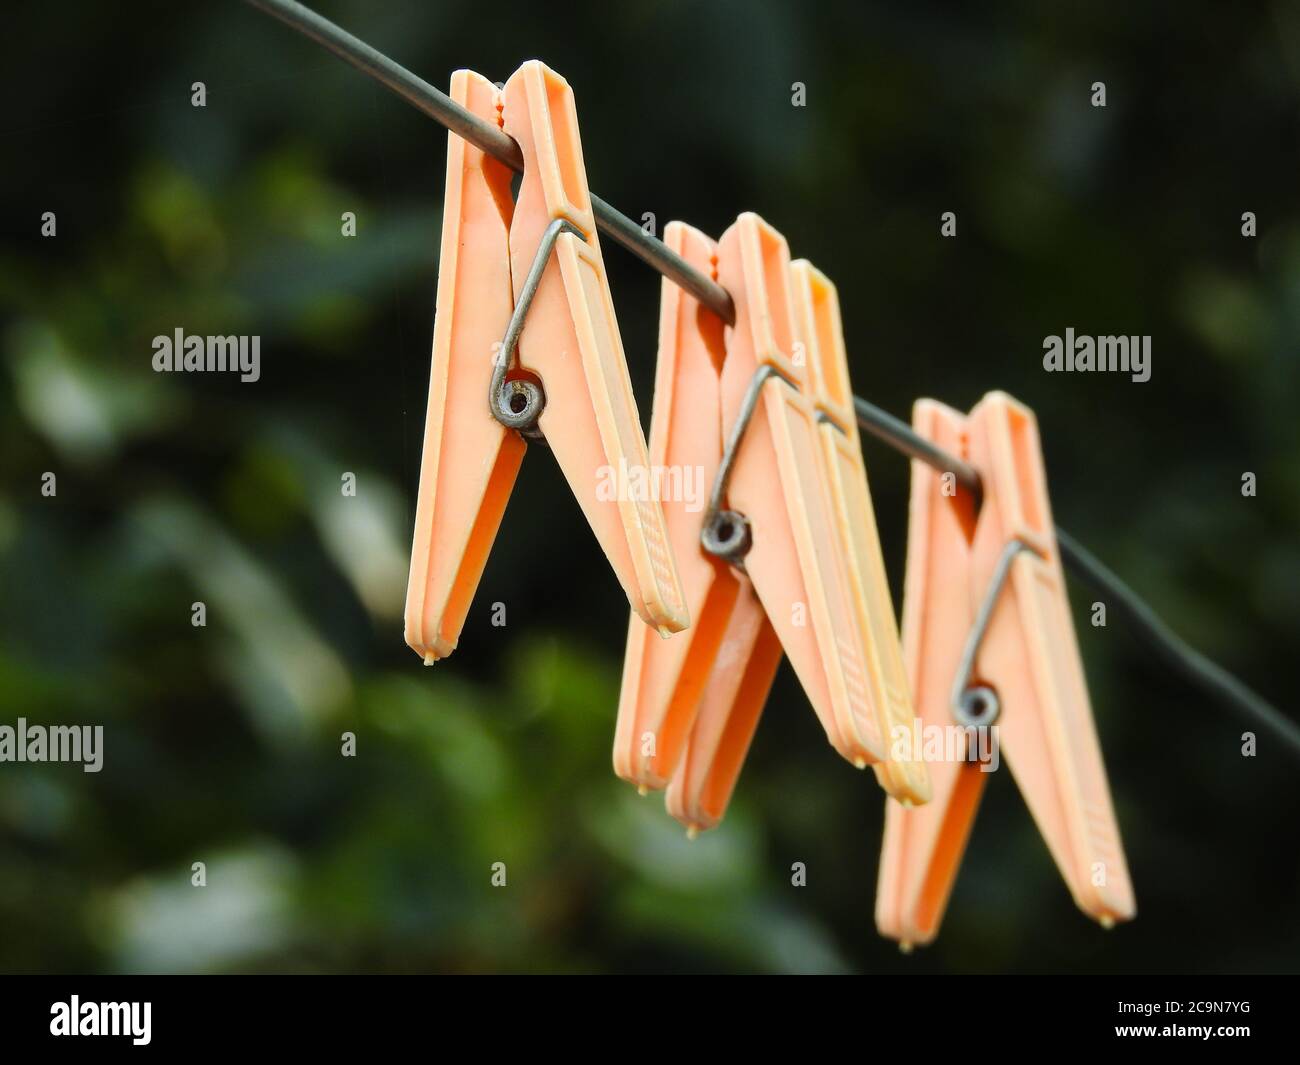 A close up shot of plastic cloth clips. These cloth clips prevent cloths from winds. Stock Photo